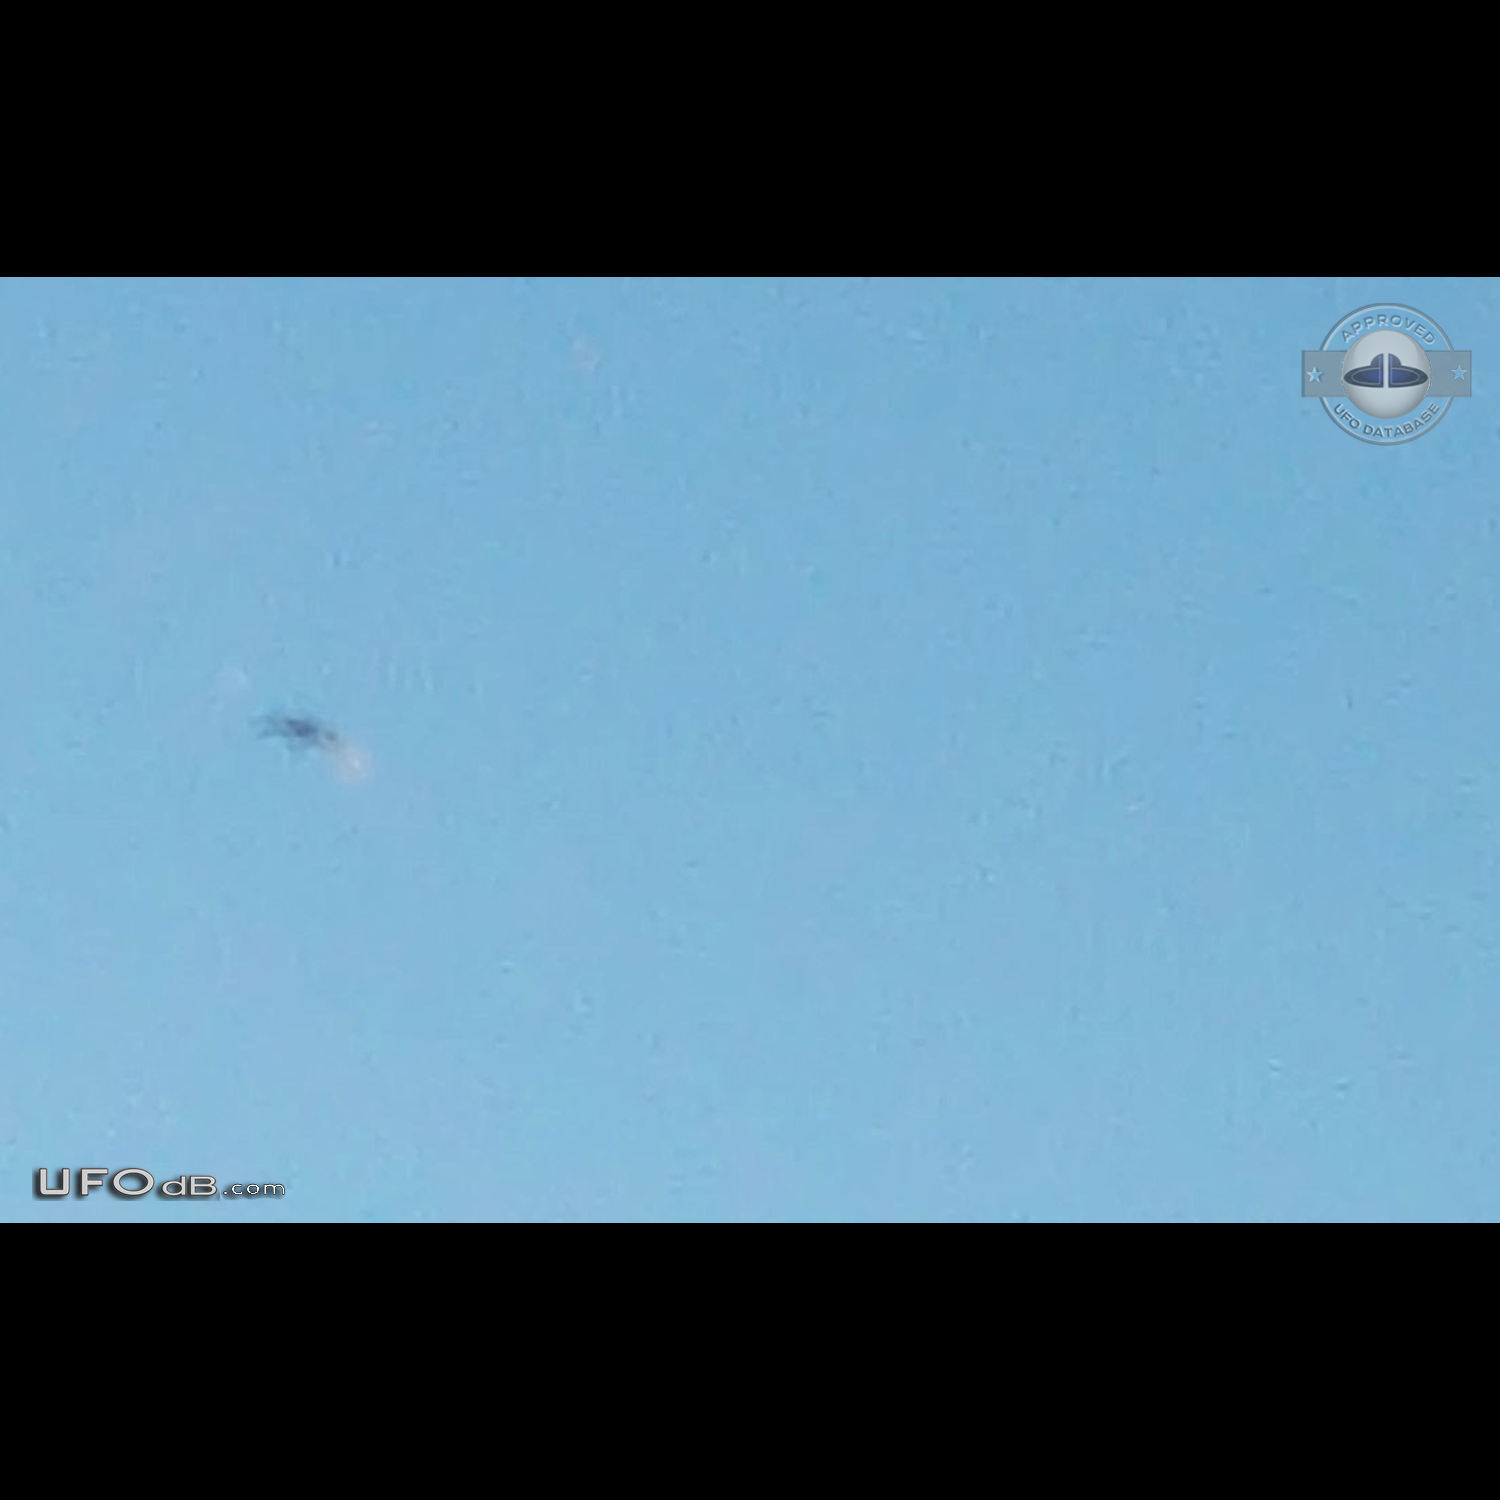 White trail with 45 angle - UFO going vertical - Derby England UK 2016 UFO Picture #777-1